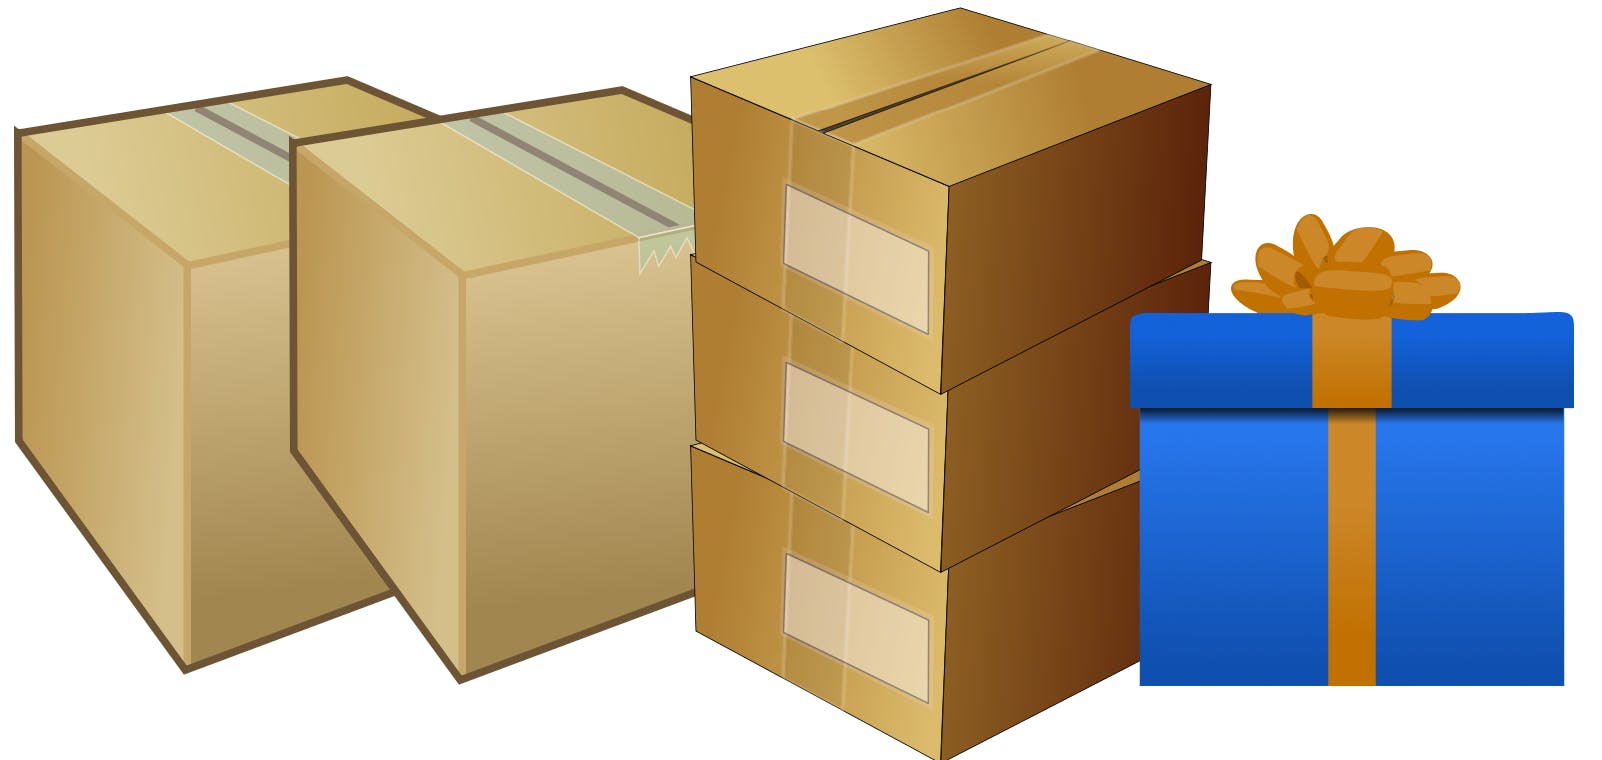 Different boxes, with different colors and sizes